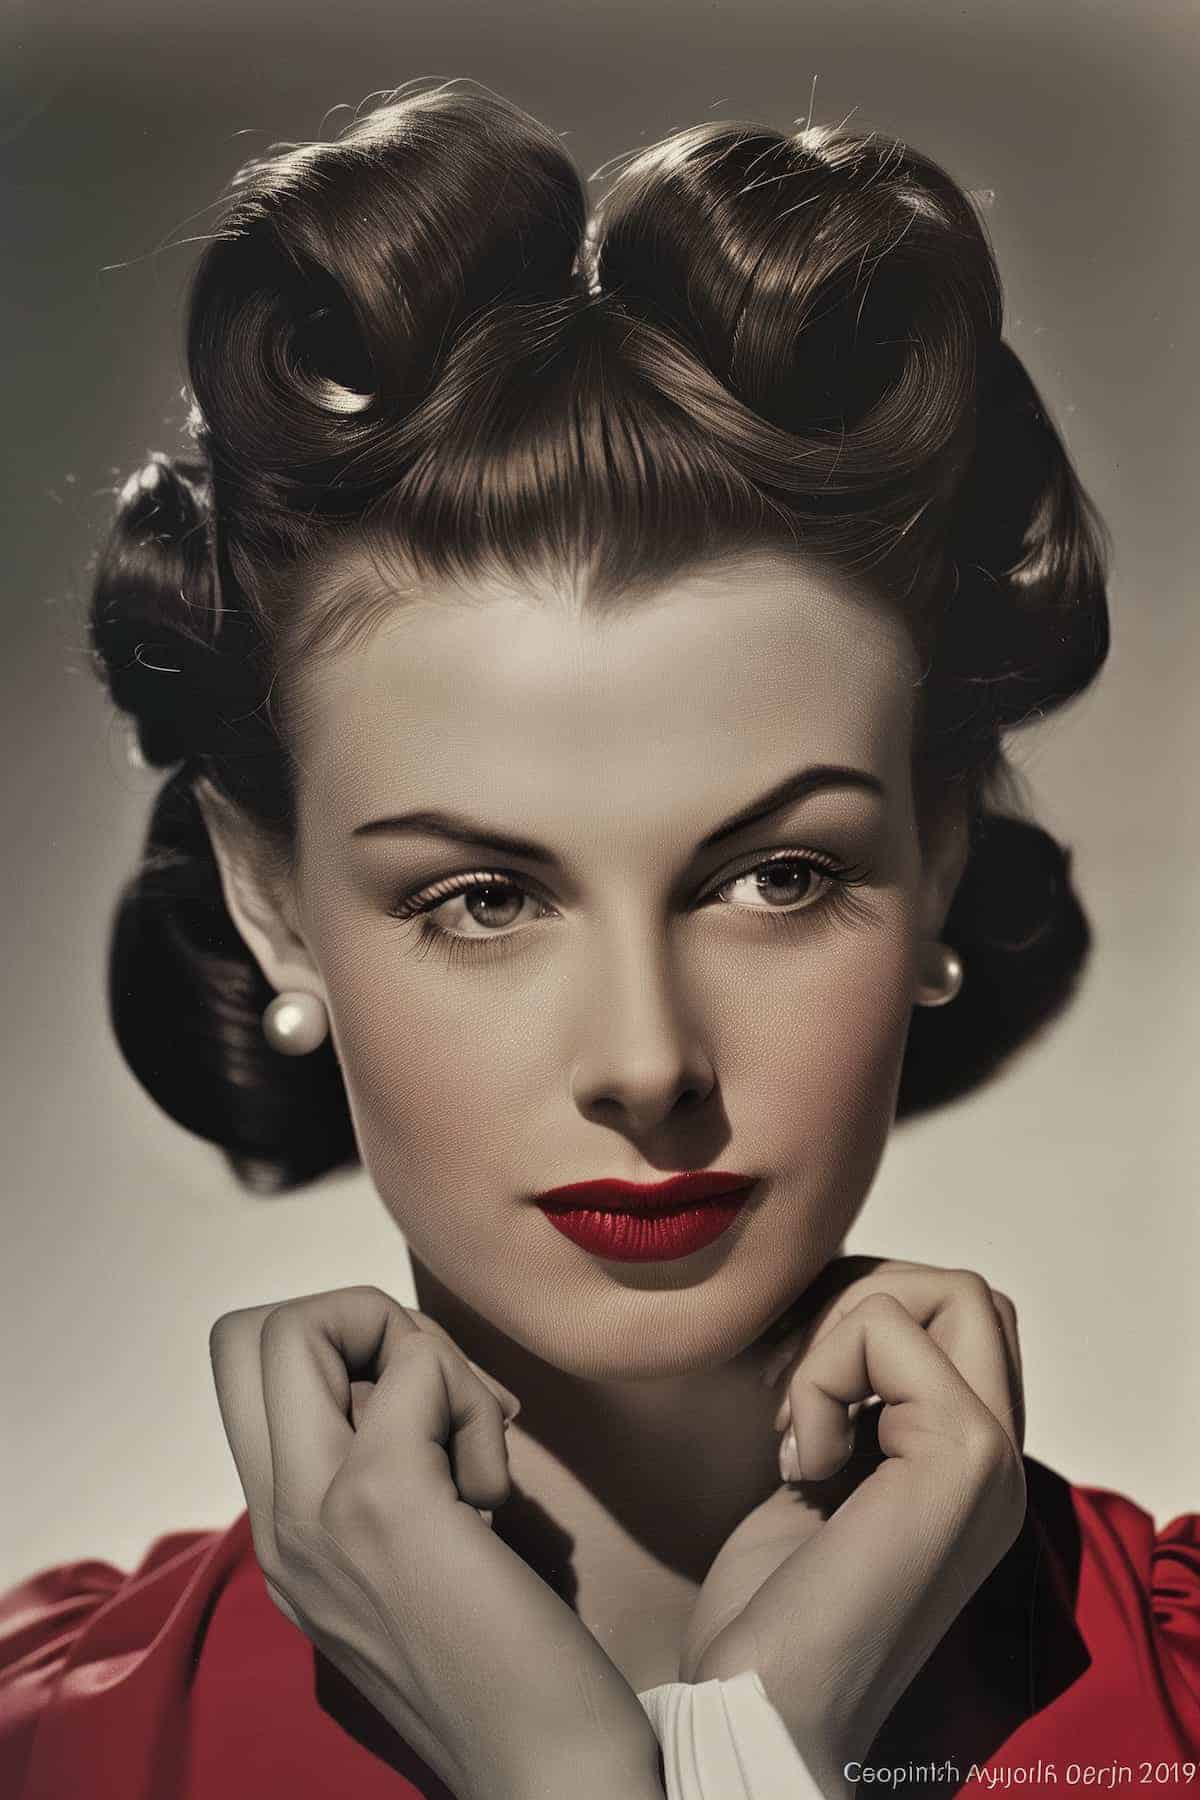 1930s Hairstyles: Iconic Styles and How To Achieve Them